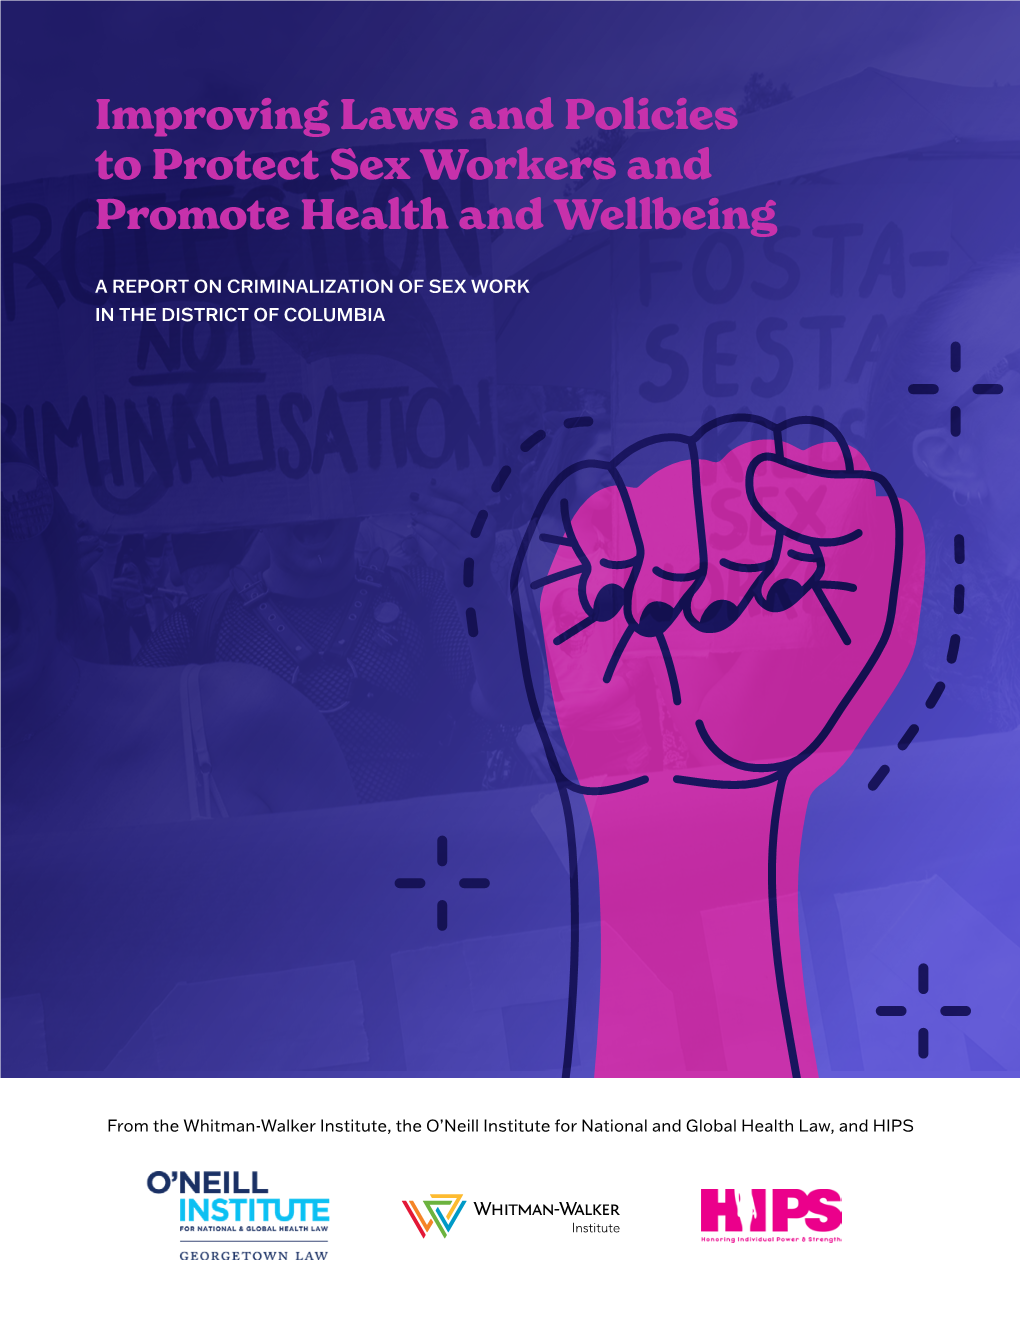 Improving Laws and Policies to Protect Sex Workers and Promote Health and Wellbeing